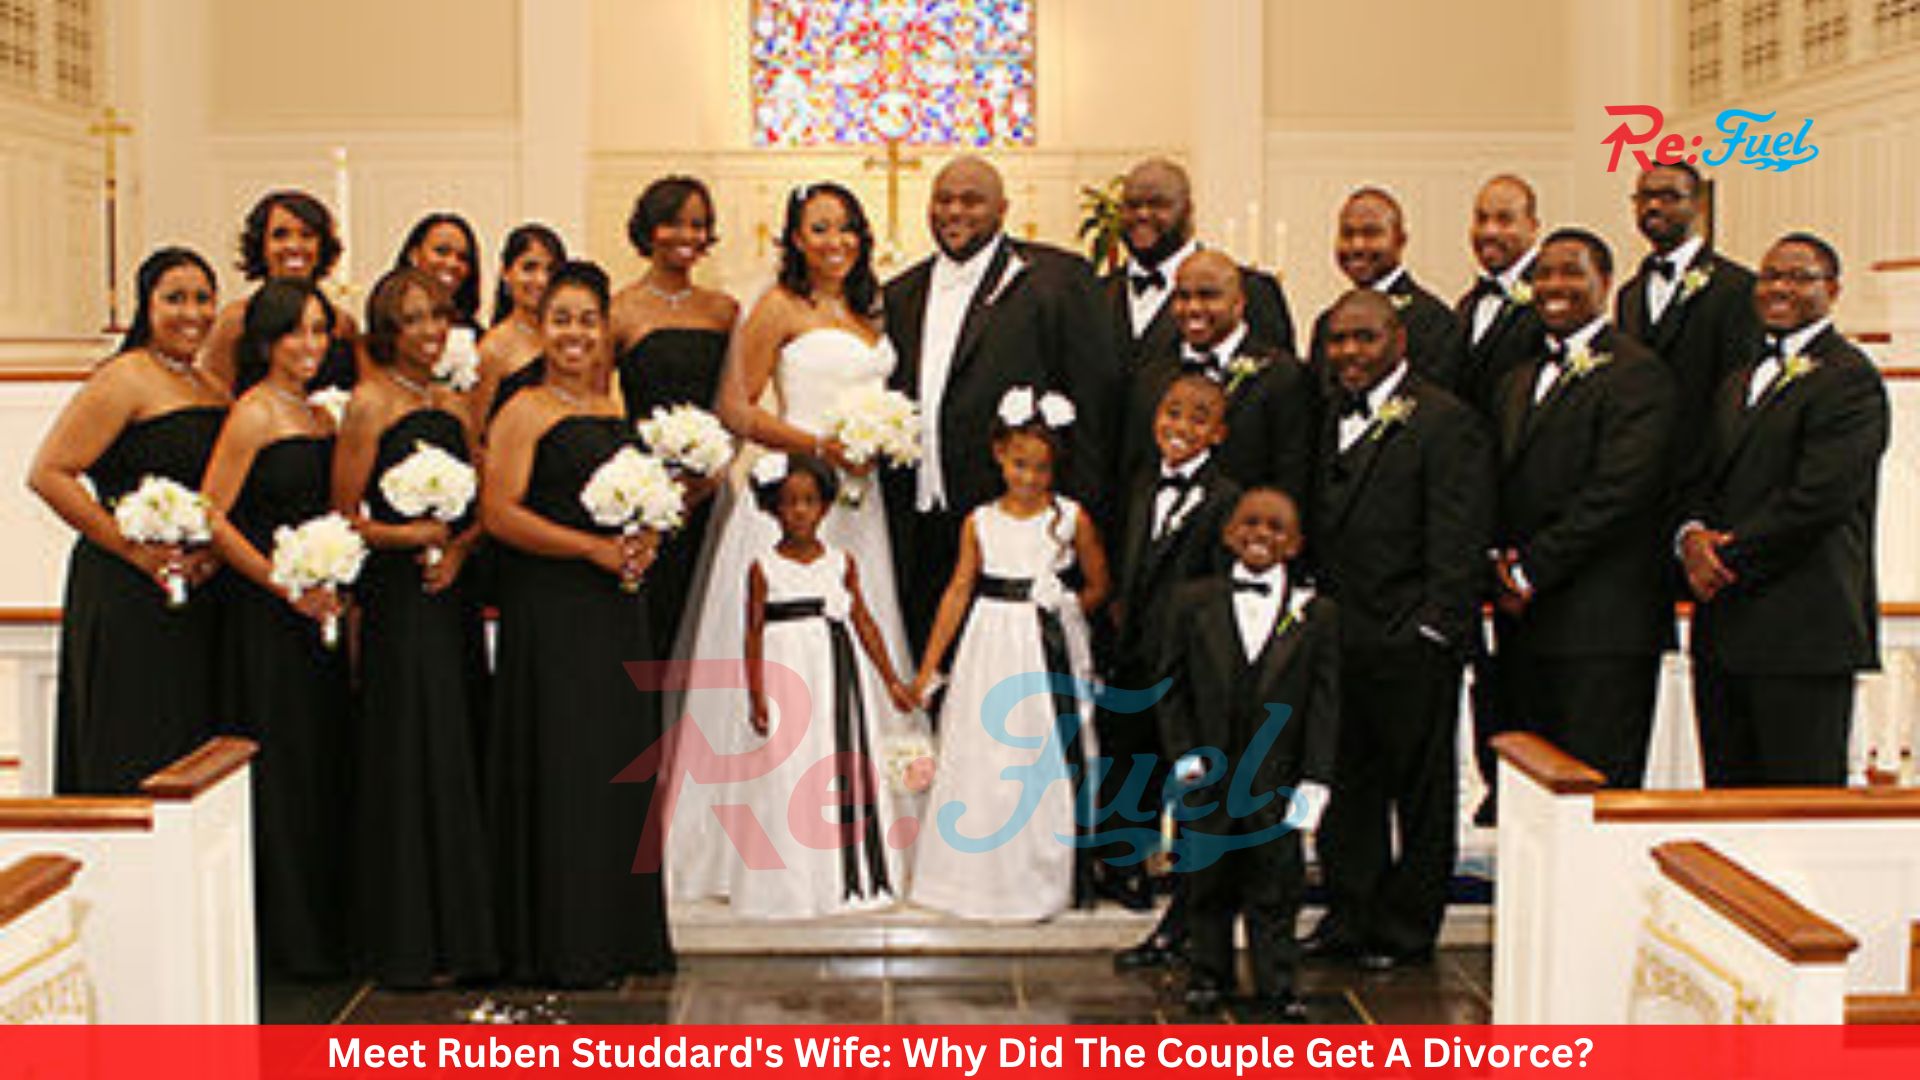 Meet Ruben Studdard's Wife: Why Did The Couple Get A Divorce?